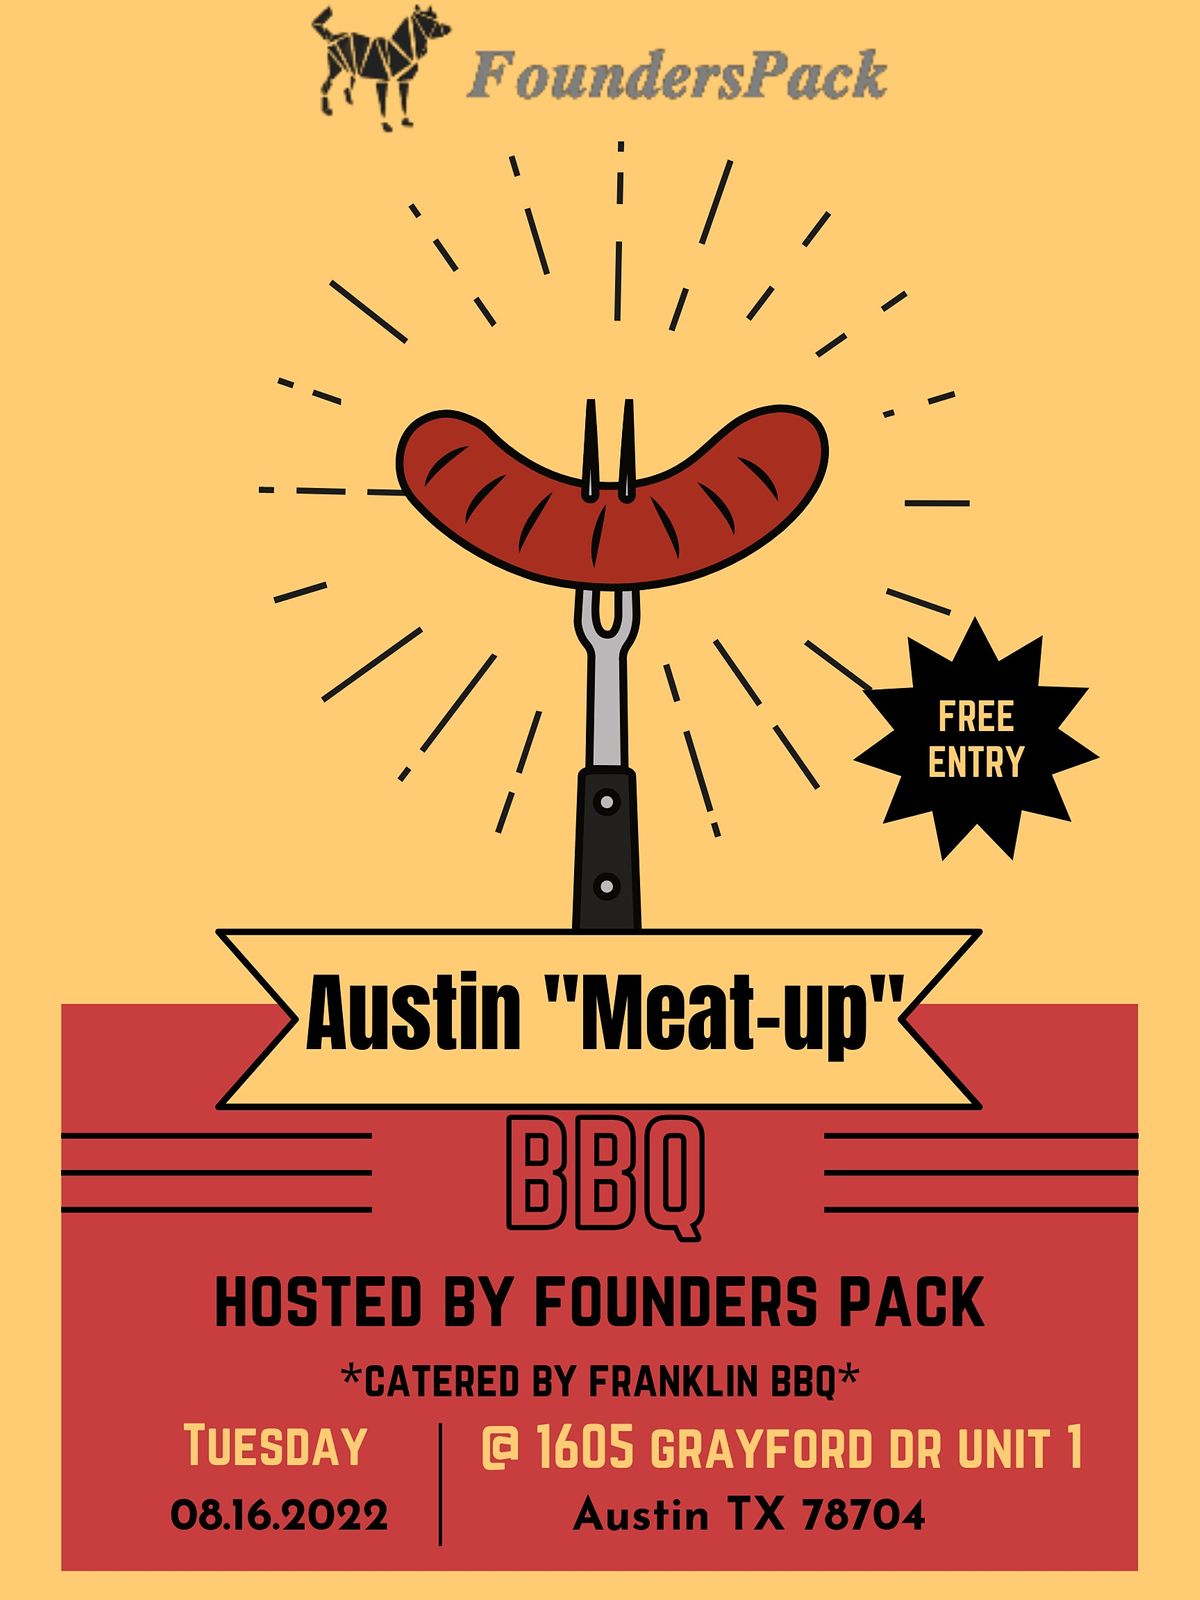 Founders Pack Austin "Meat-up" BBQ